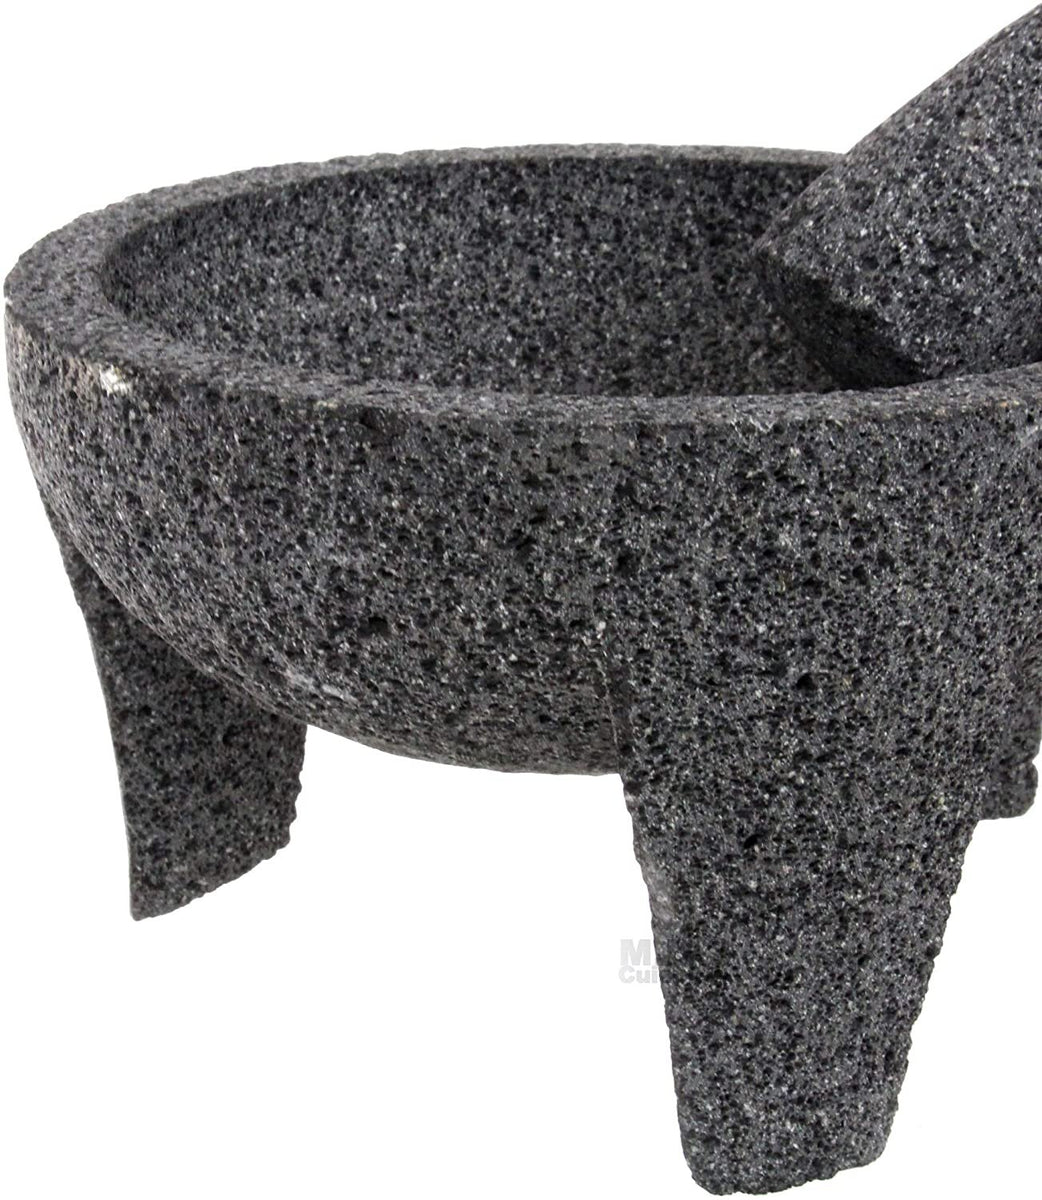 Molcajete/tejolote Authentic Mexican Mortar & Pestle Made From